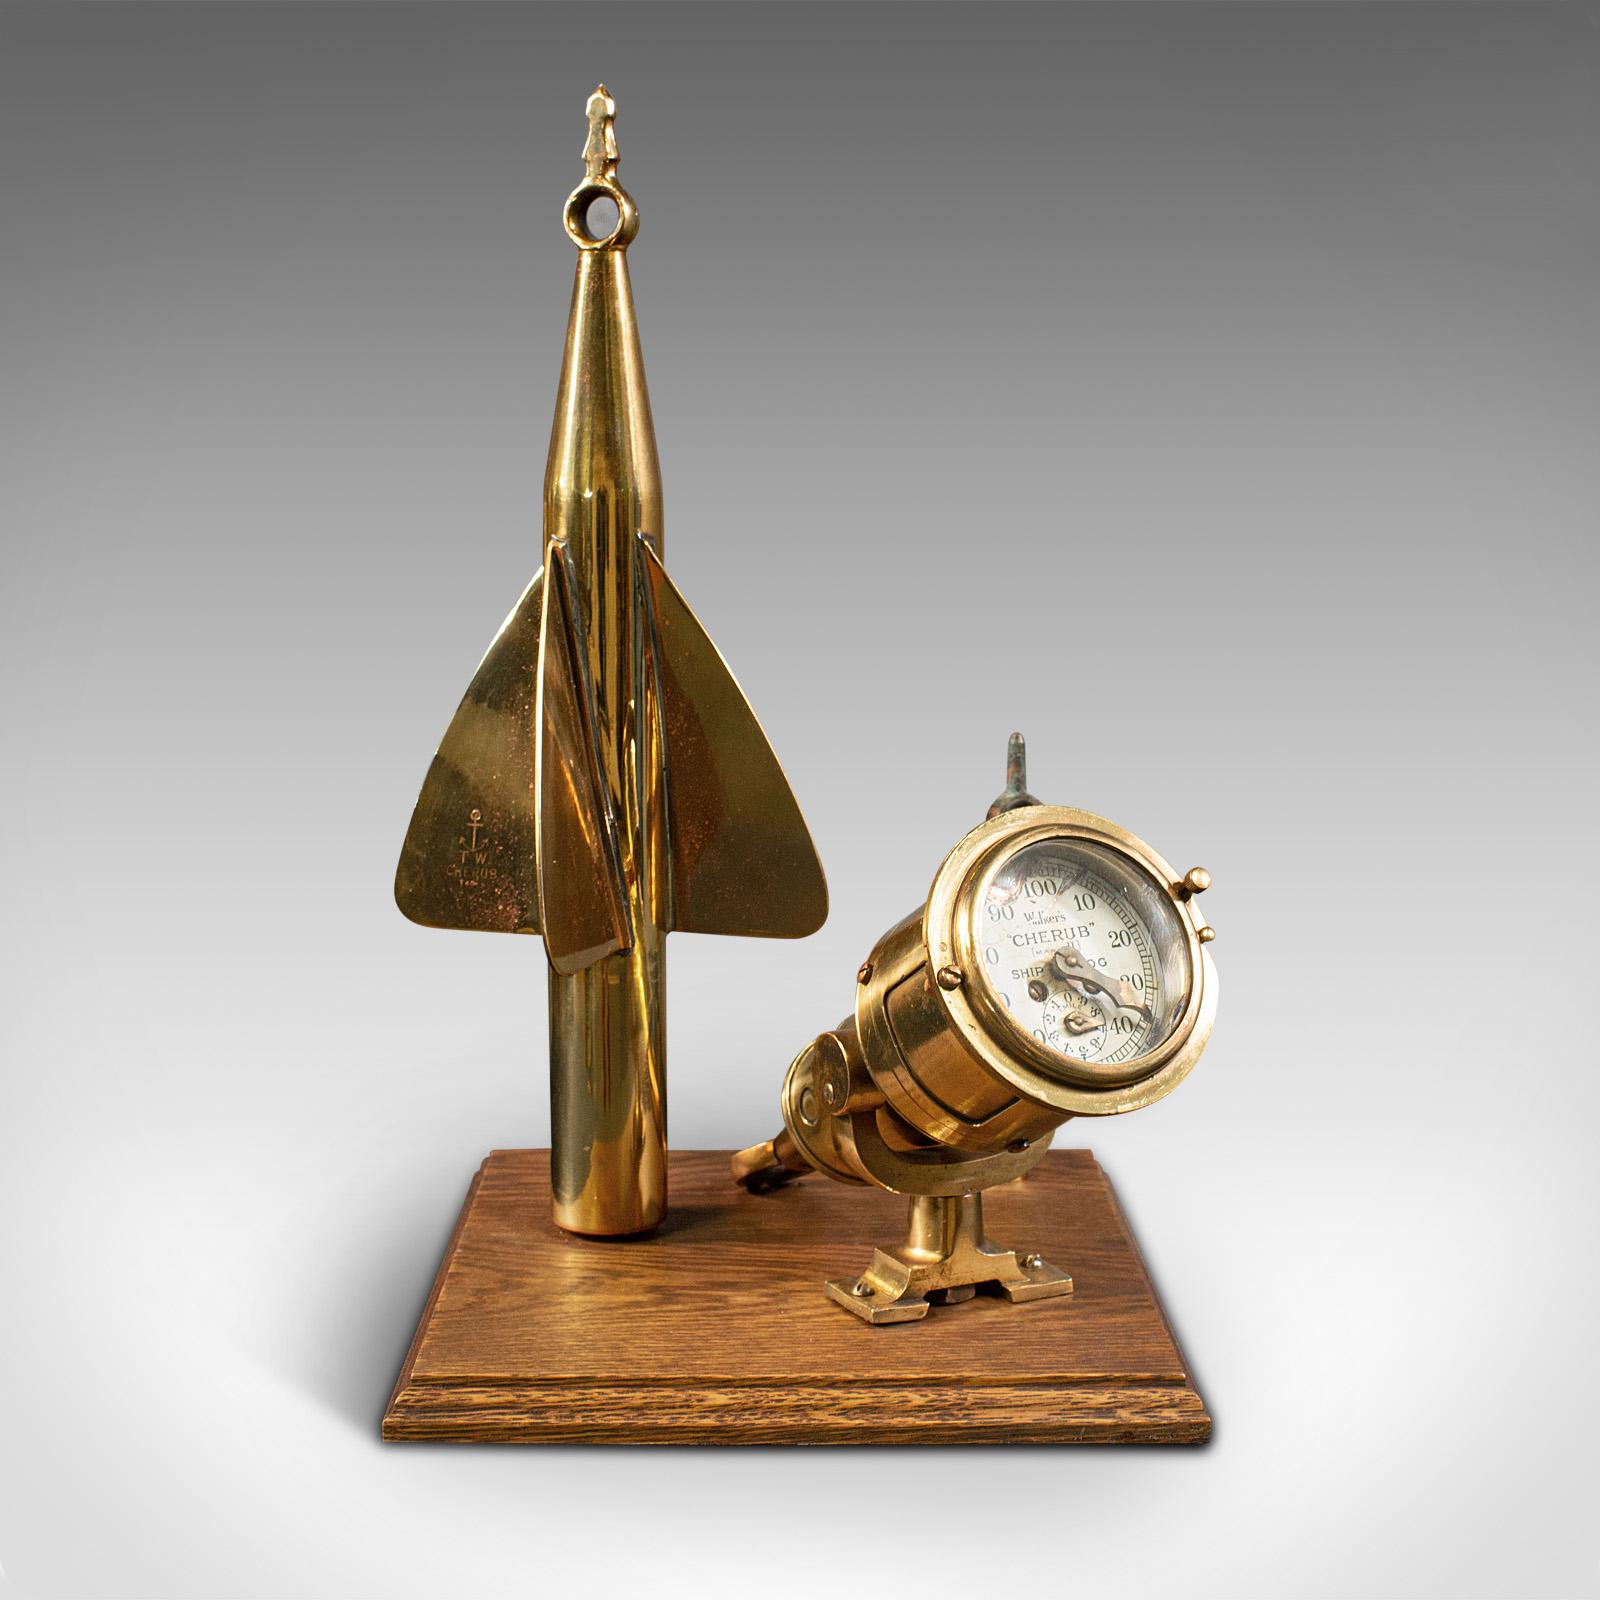 This is an antique ship's log desk ornament. An English, brass and oak maritime display instrument, dating to the early 20th century, circa 1920.

Charming nautical interest, presented for display
Displaying a desirable aged patina and in good